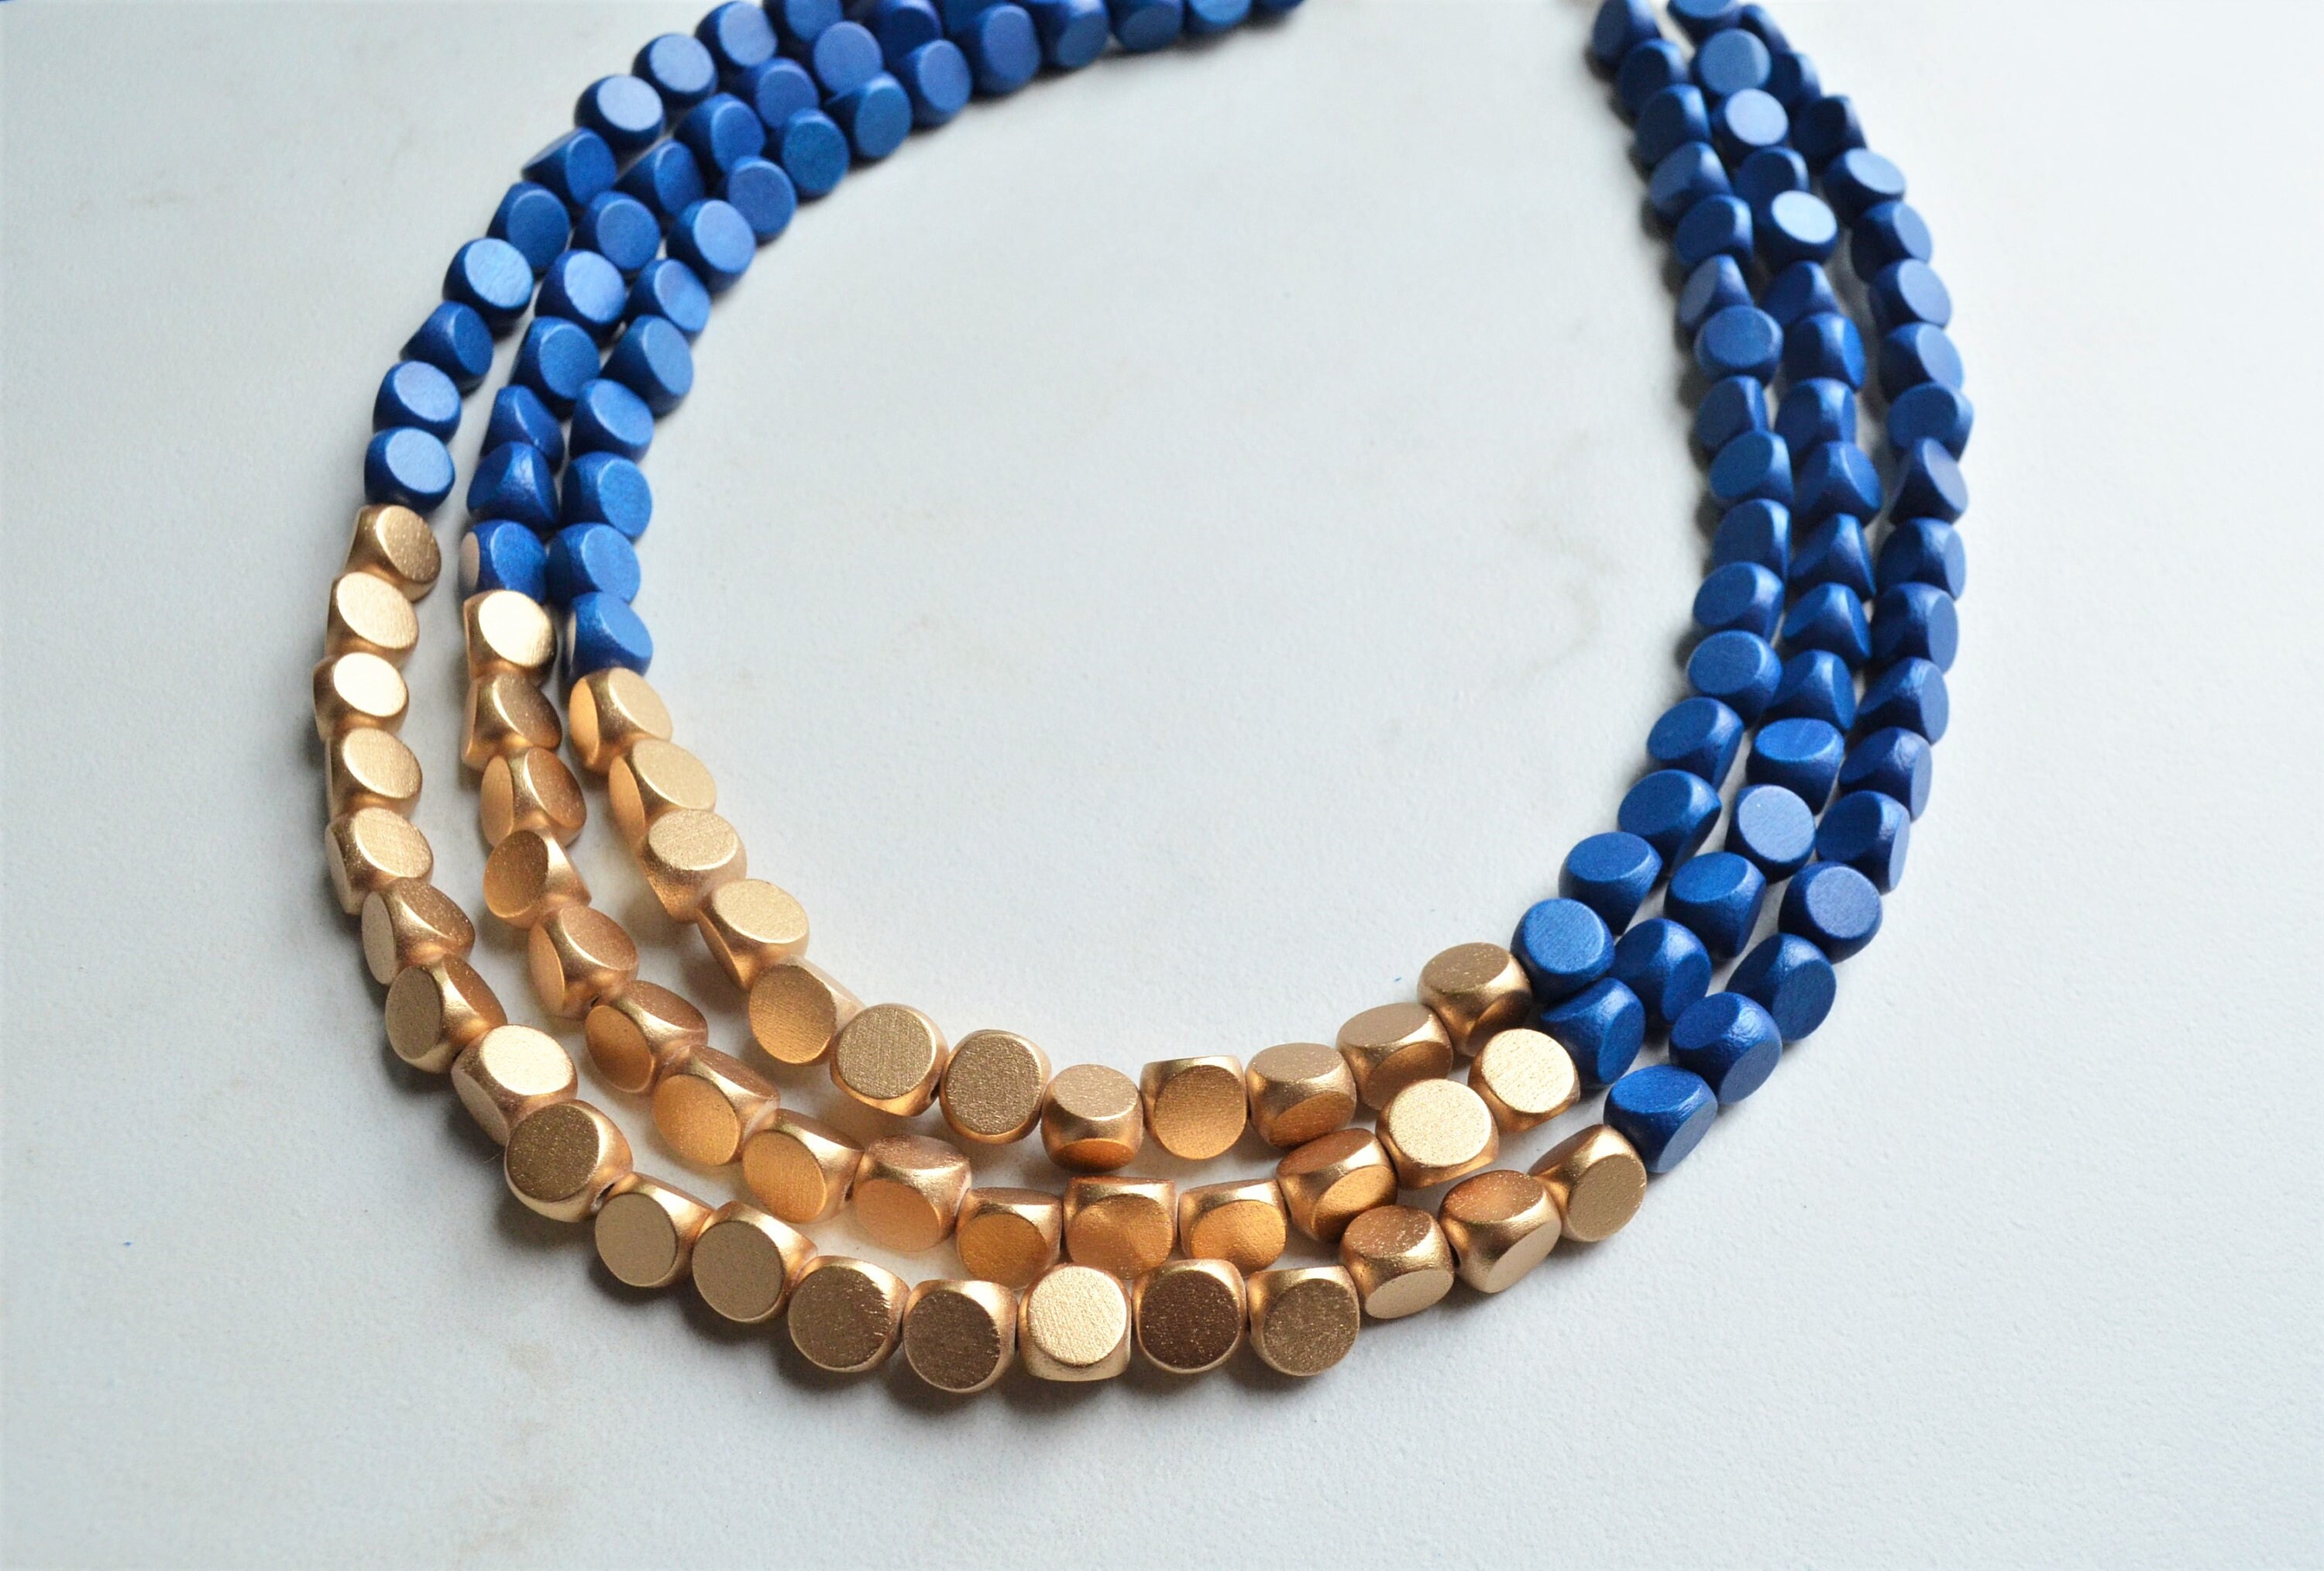 Chunky Statement Necklace Blue & Gold Color Bib Faux Jewels 20” Costume  Jewelry